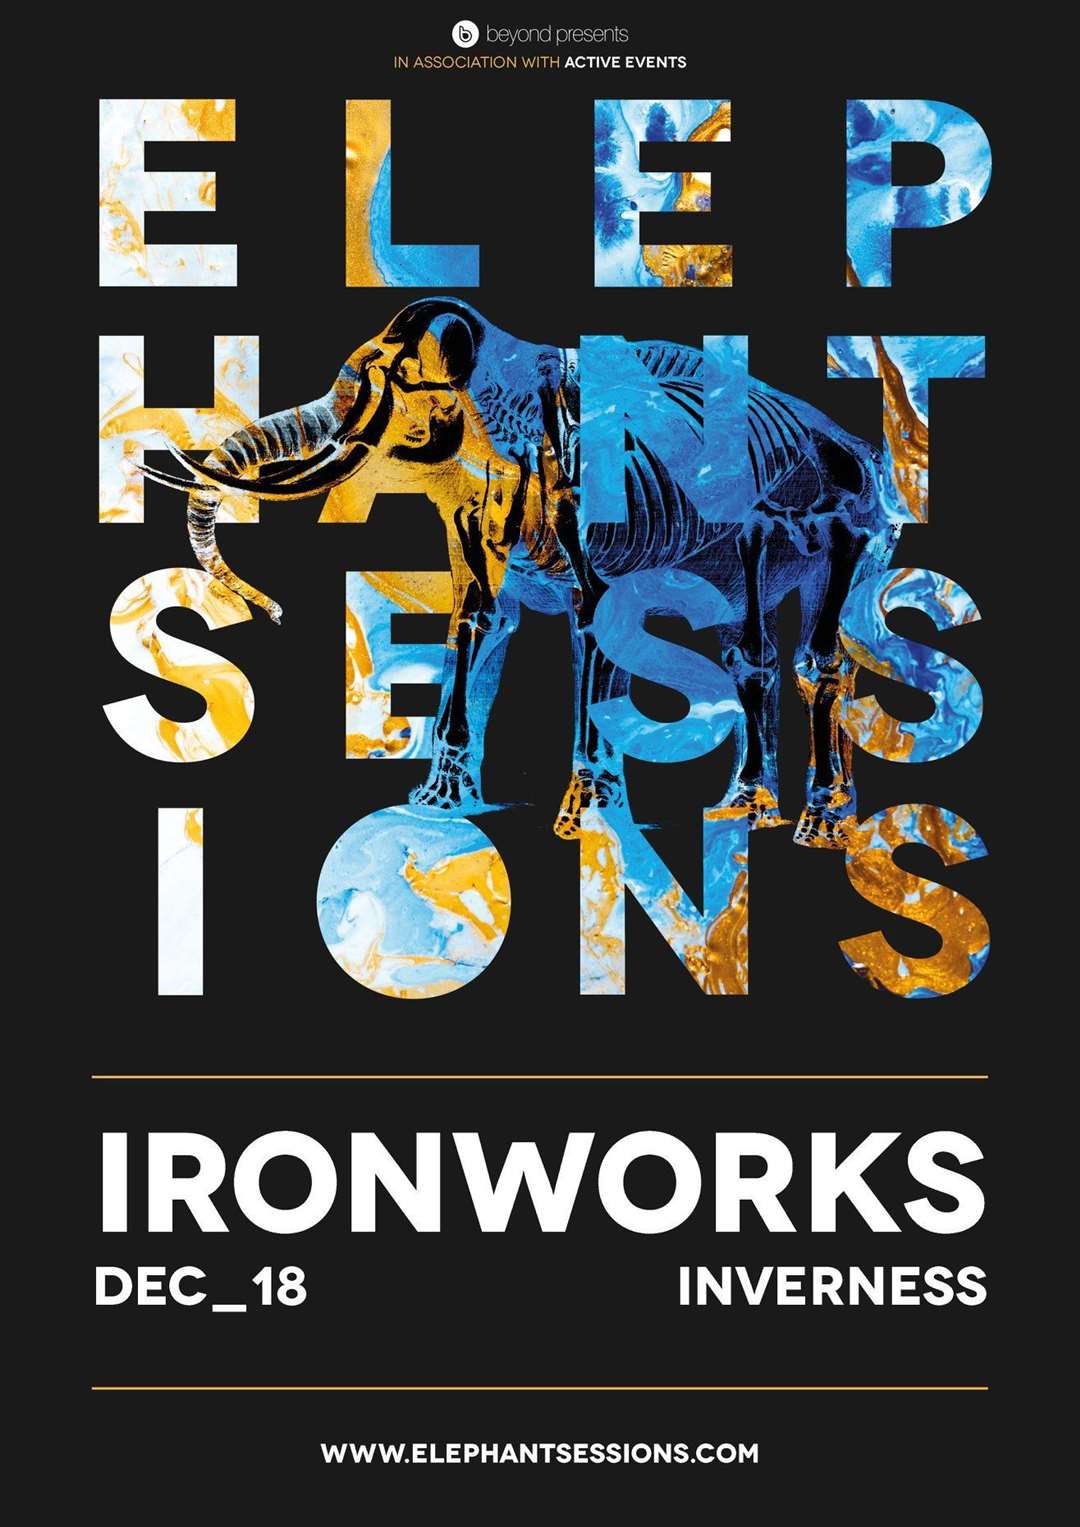 Elephant Sessions at The Ironworks.